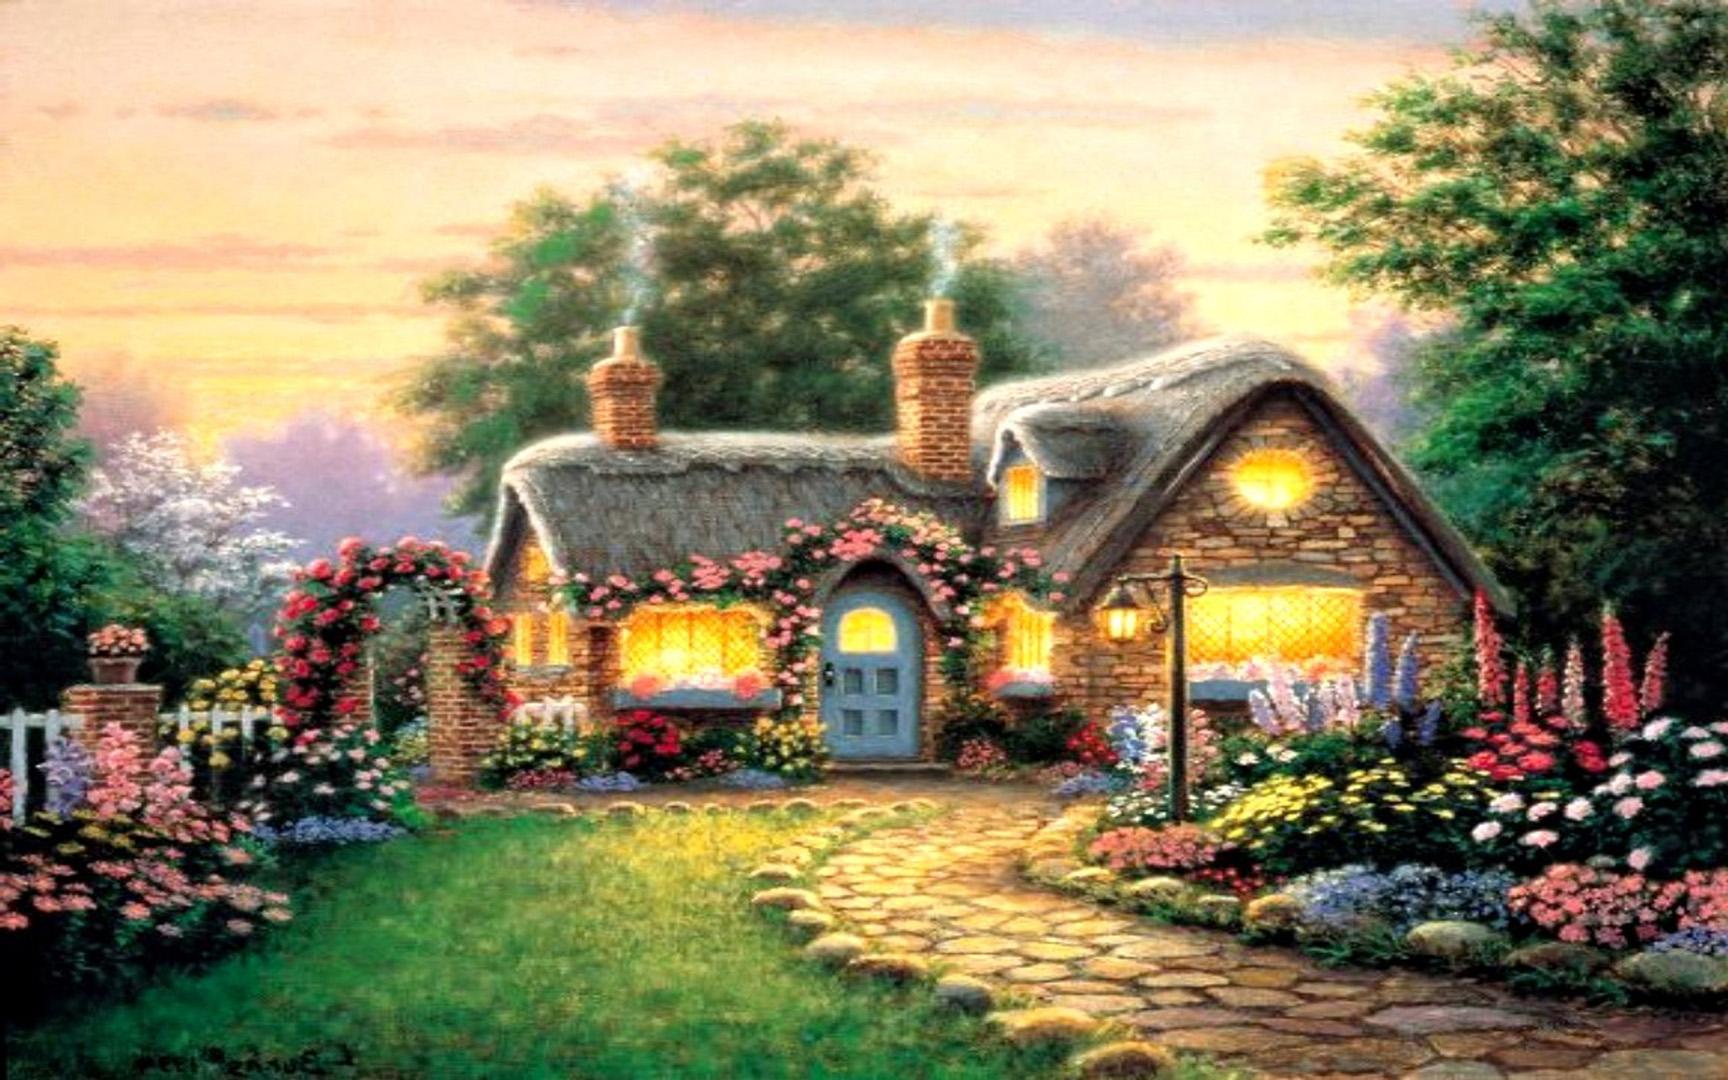 Group of Nice Wallpaper Amazing Cottage